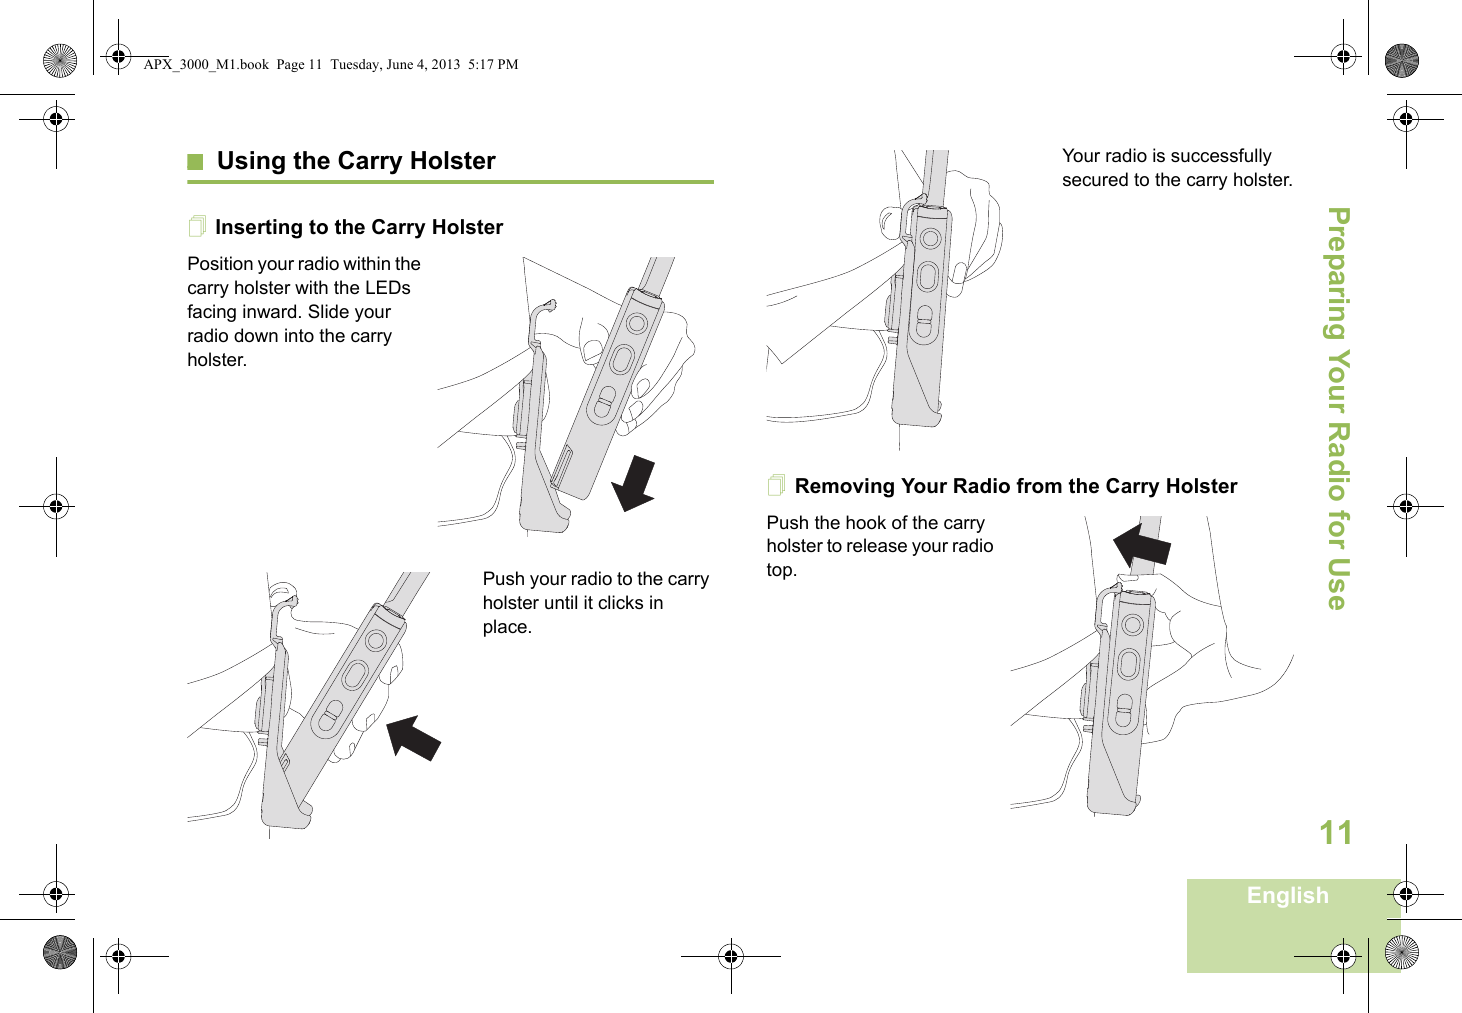 Preparing Your Radio for UseEnglish11Using the Carry HolsterInserting to the Carry HolsterPosition your radio within the carry holster with the LEDs facing inward. Slide your radio down into the carry holster.Push your radio to the carry holster until it clicks in place.Your radio is successfully secured to the carry holster.Removing Your Radio from the Carry HolsterPush the hook of the carry holster to release your radio top. APX_3000_M1.book  Page 11  Tuesday, June 4, 2013  5:17 PM